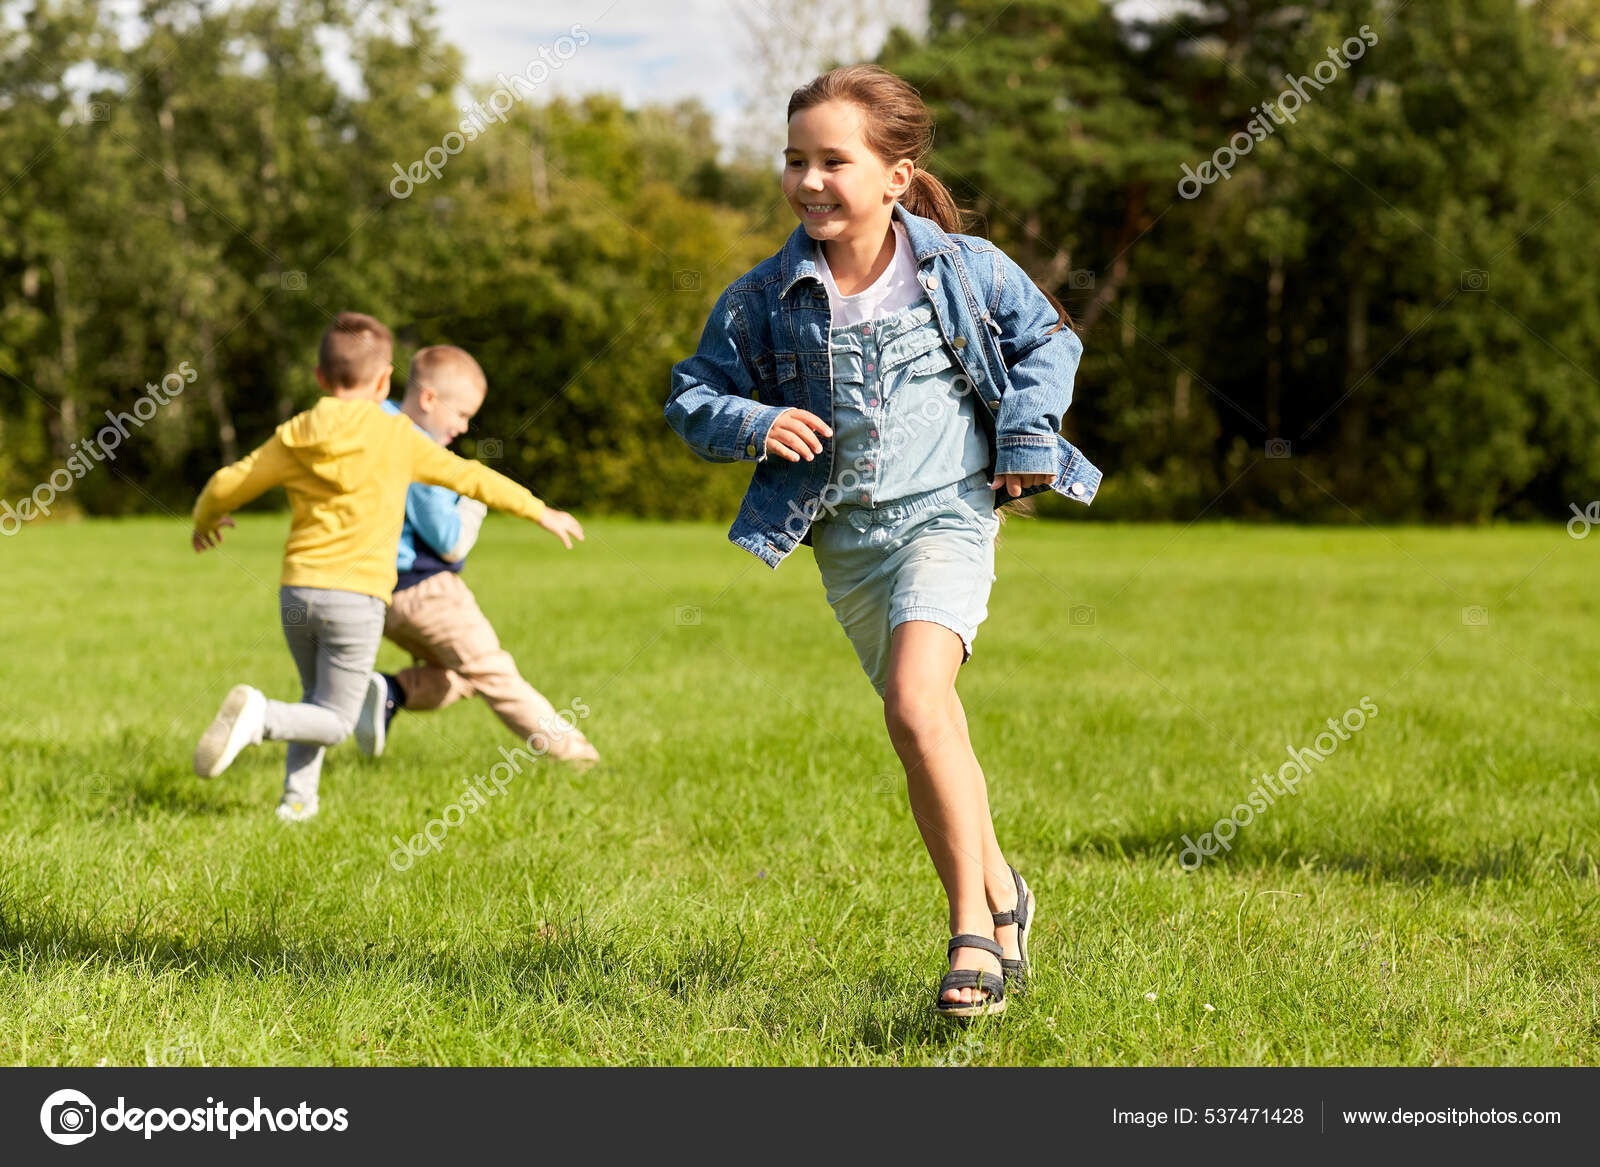 6+ Thousand Children Playing Tag Royalty-Free Images, Stock Photos